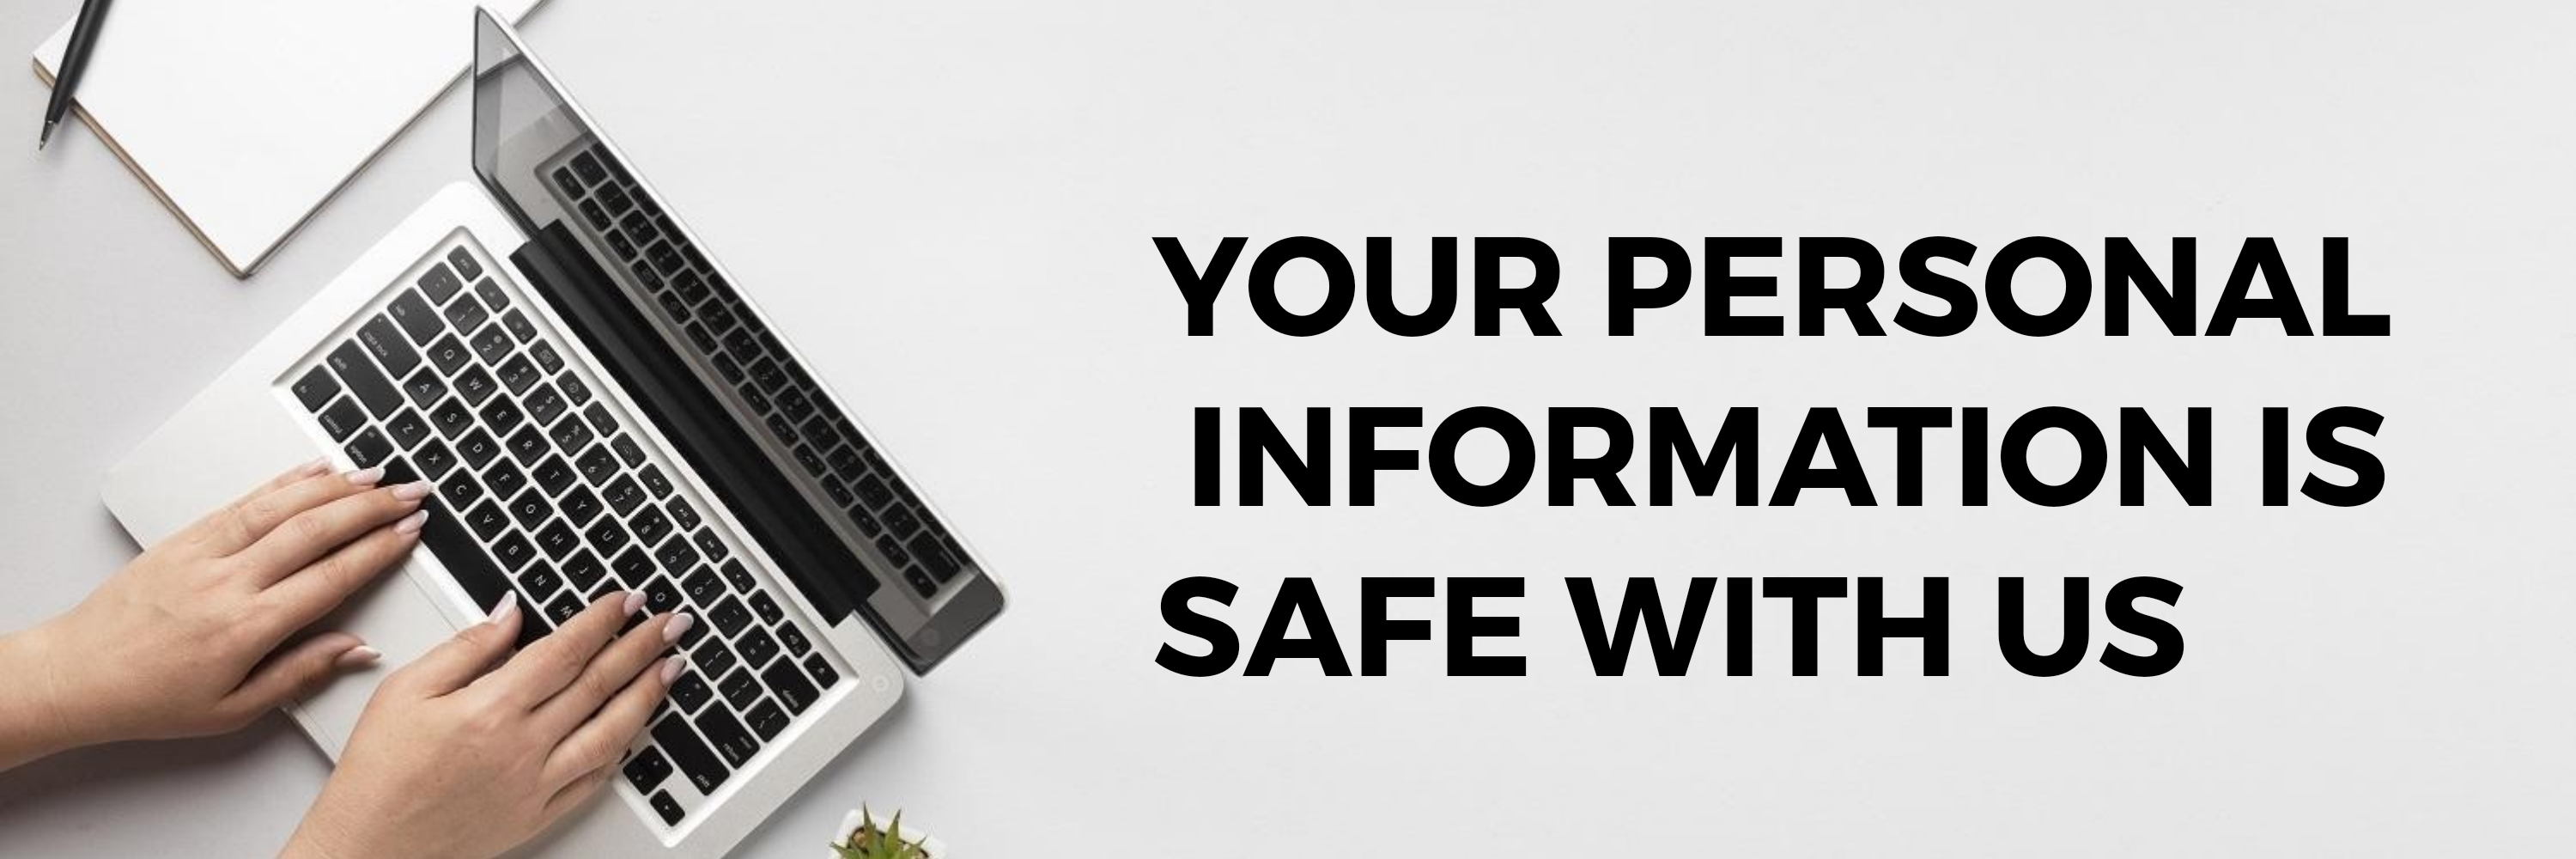 HOW WE PROTECT YOUR INFORMATION